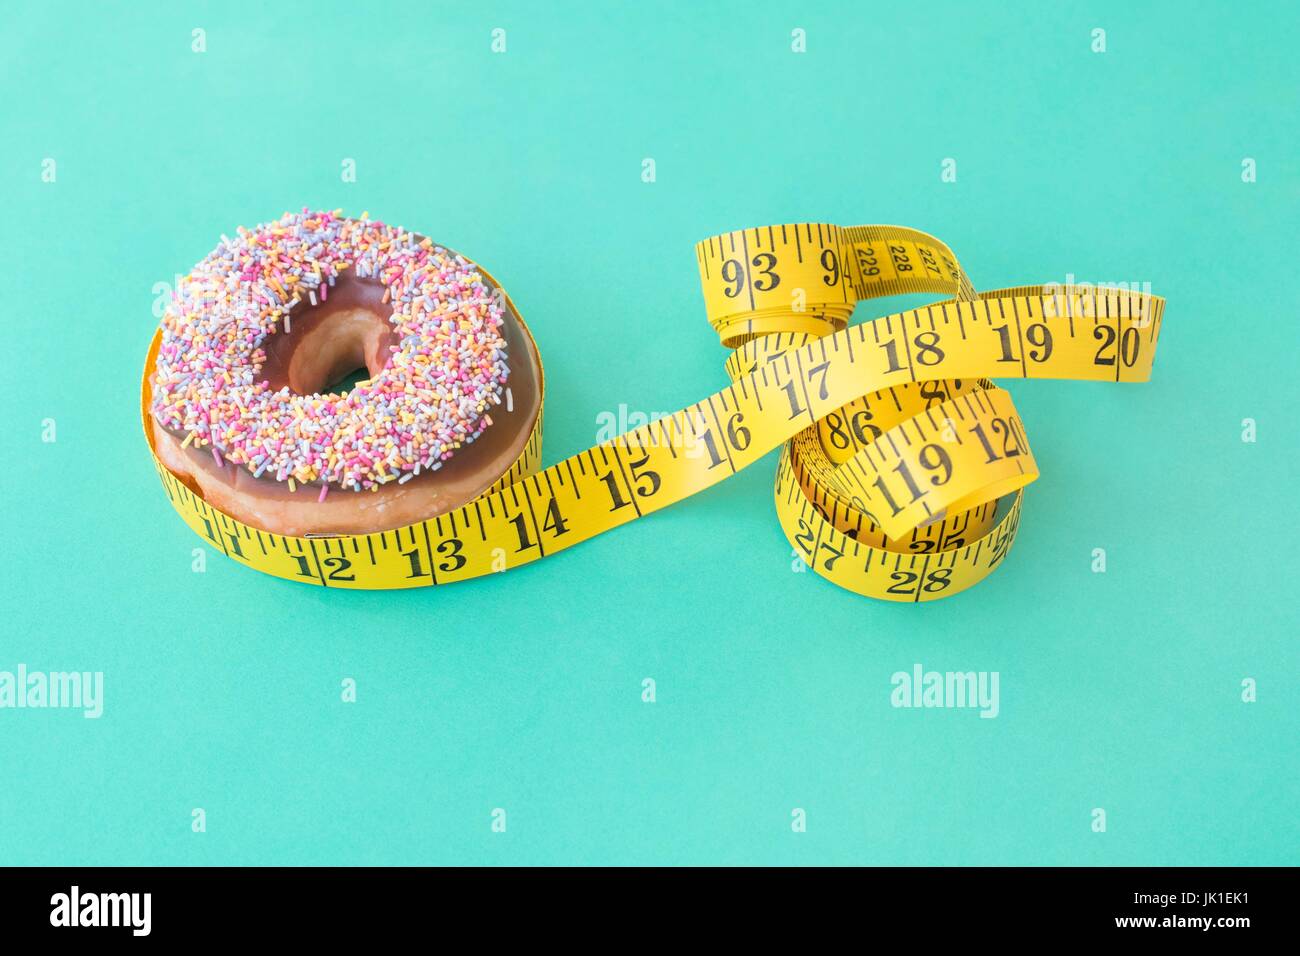 Doughnut with sprinkles and yellow tape measure against a green background. Conceptual image of controlling calorie intake. Stock Photo